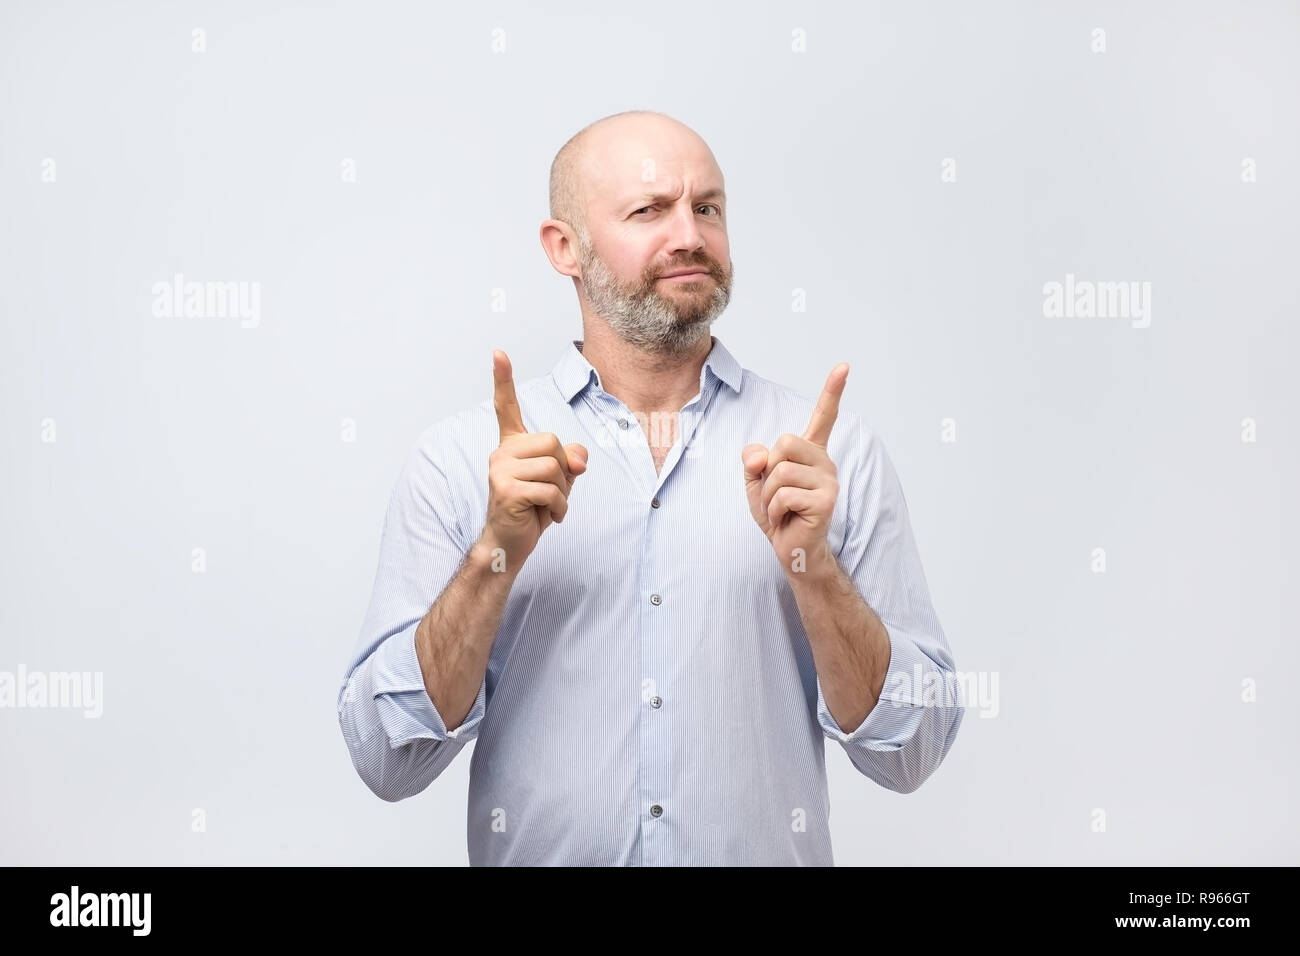 Strict mature man showing index fingers up, giving advice Stock Photo